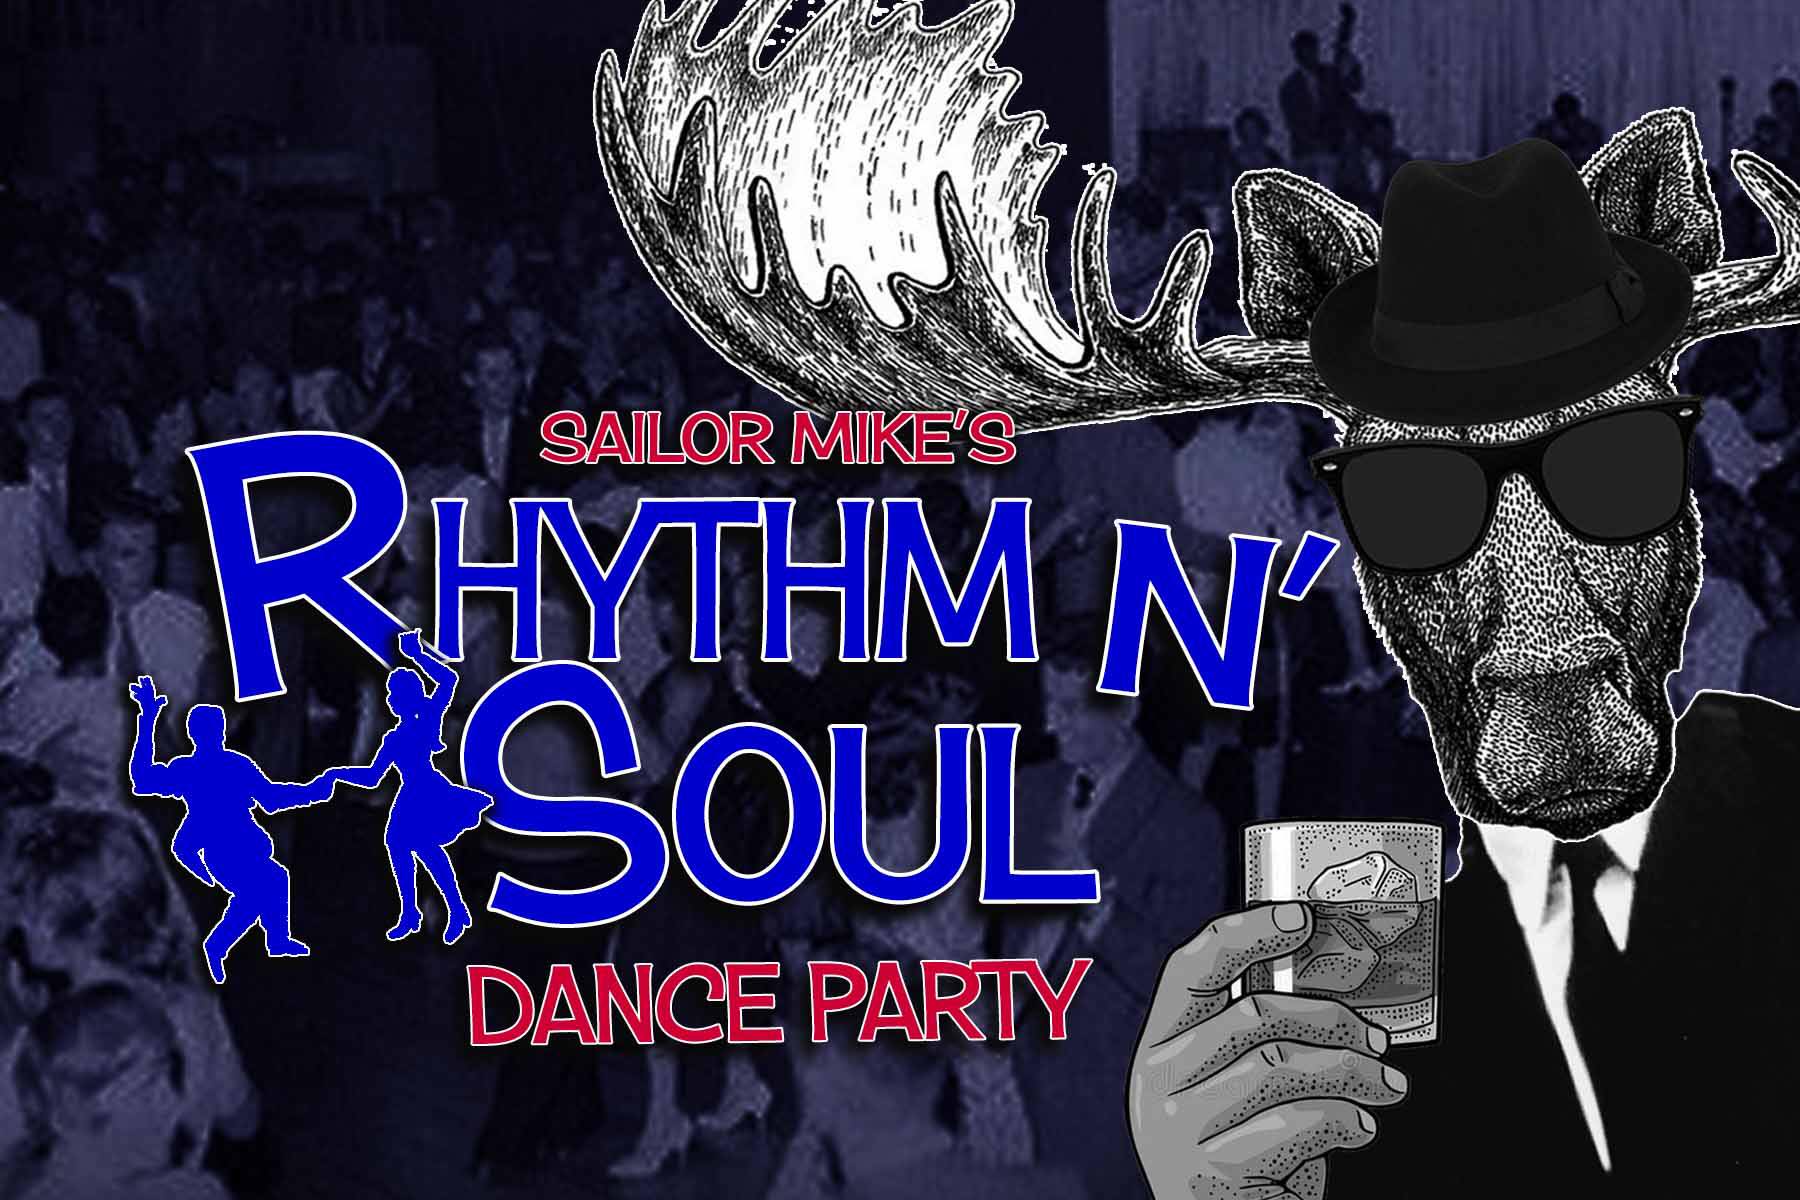 SAILOR MIKE’S RHYTHM N’ SOUL PARTY at The Burbank Moose Lodge!